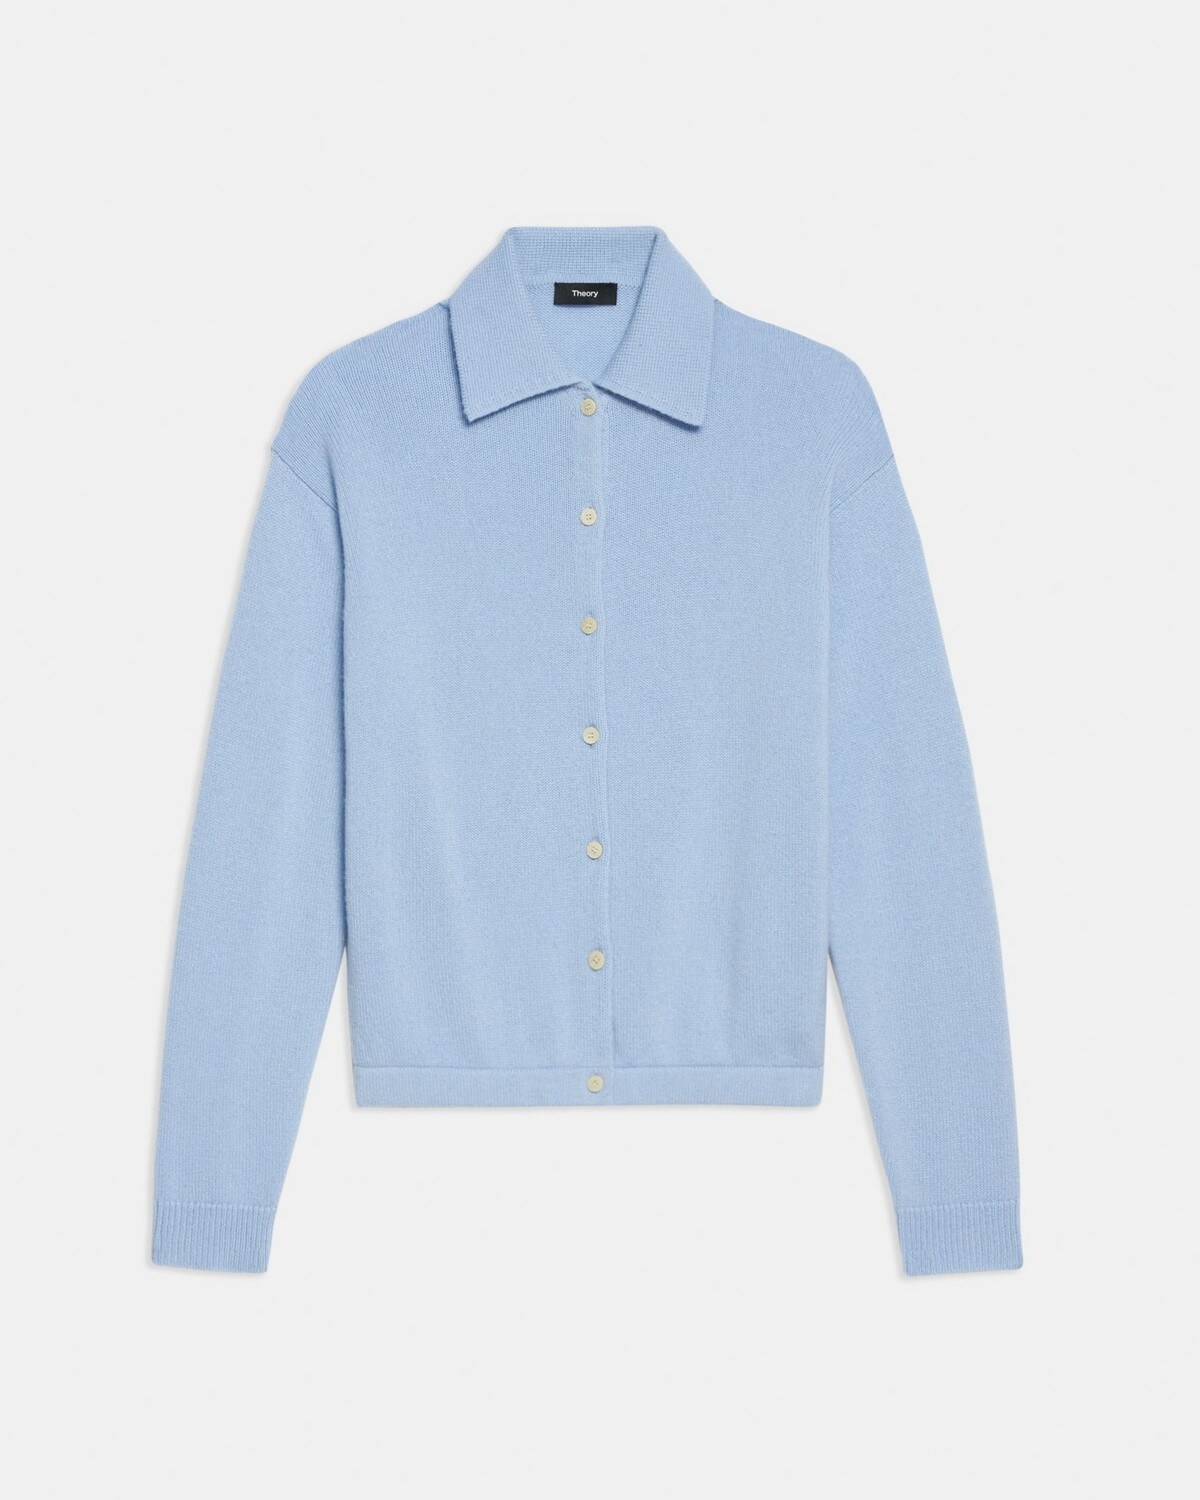 Cropped Polo Cardigan in Cashmere